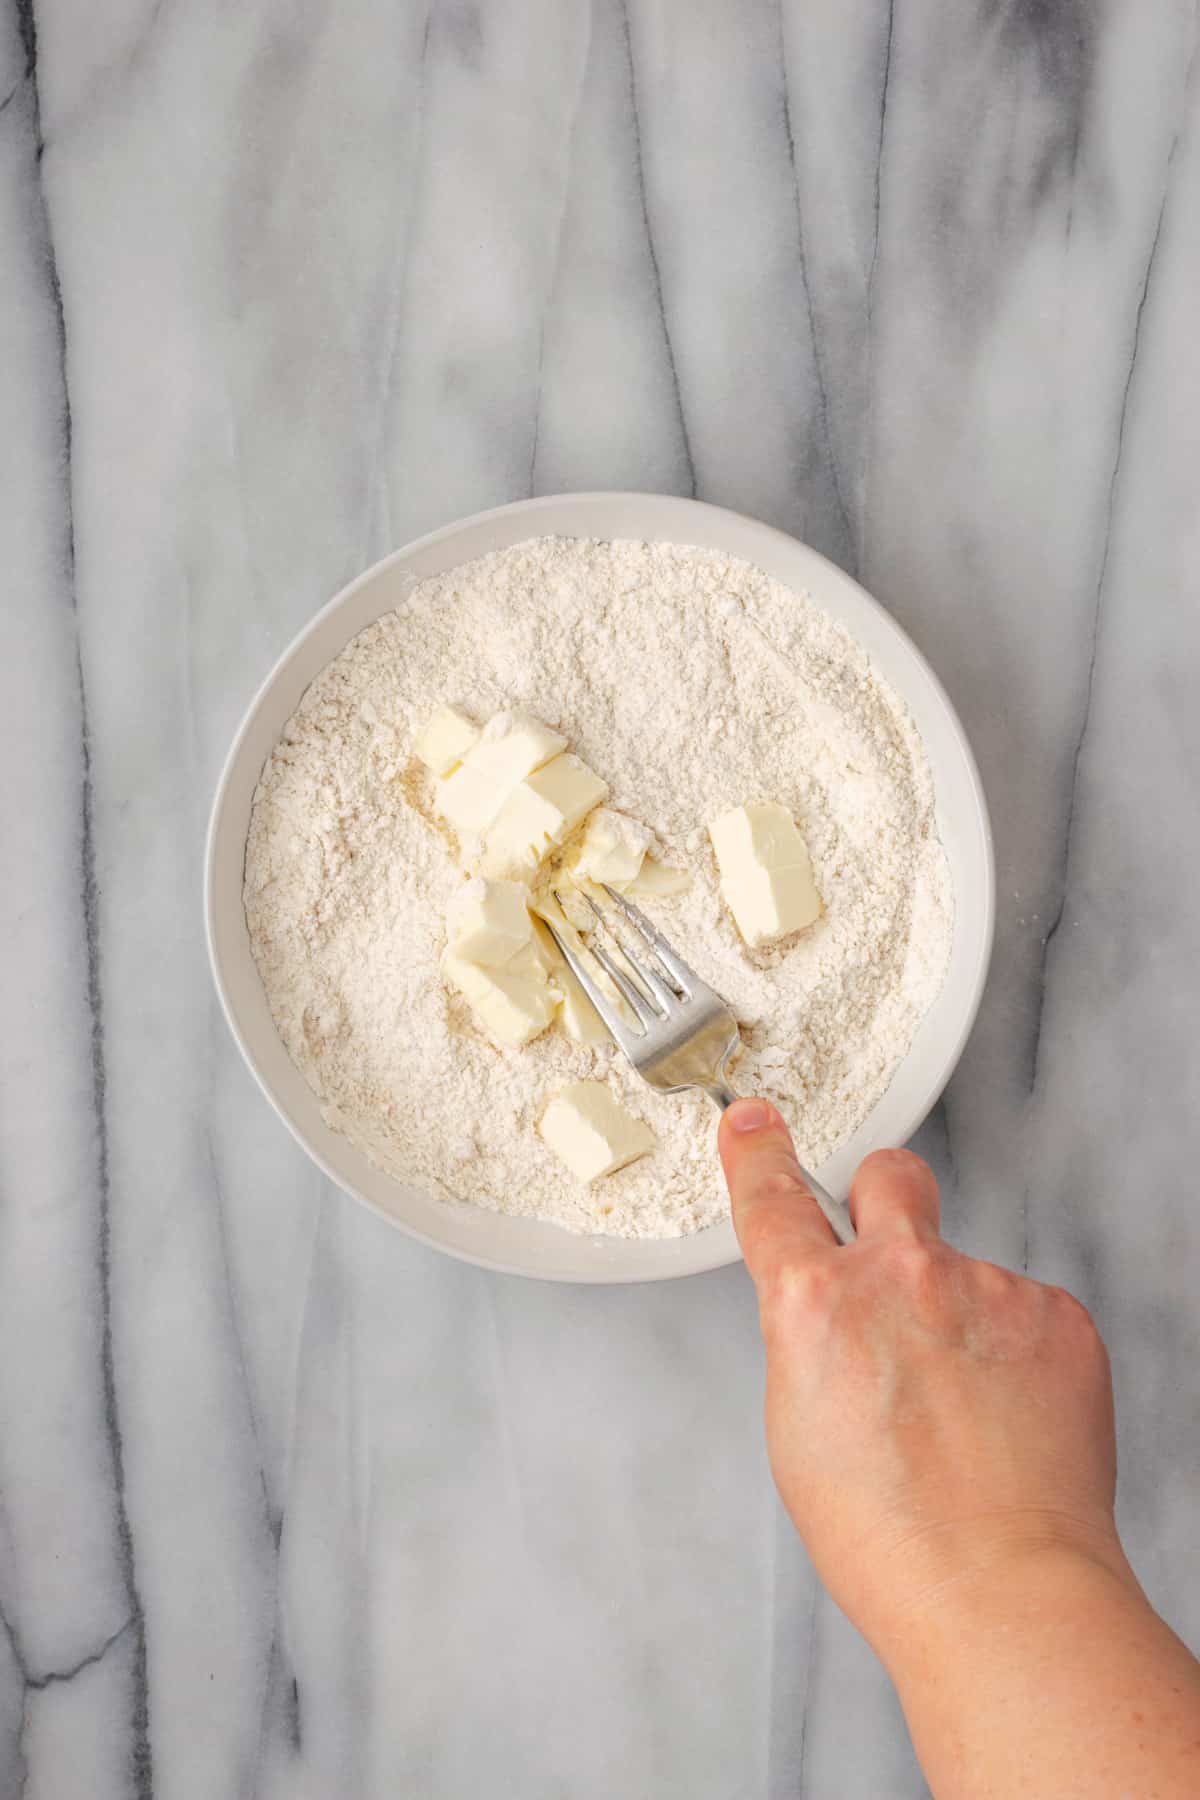 Butter being smashed into the dry ingredients with a fork.